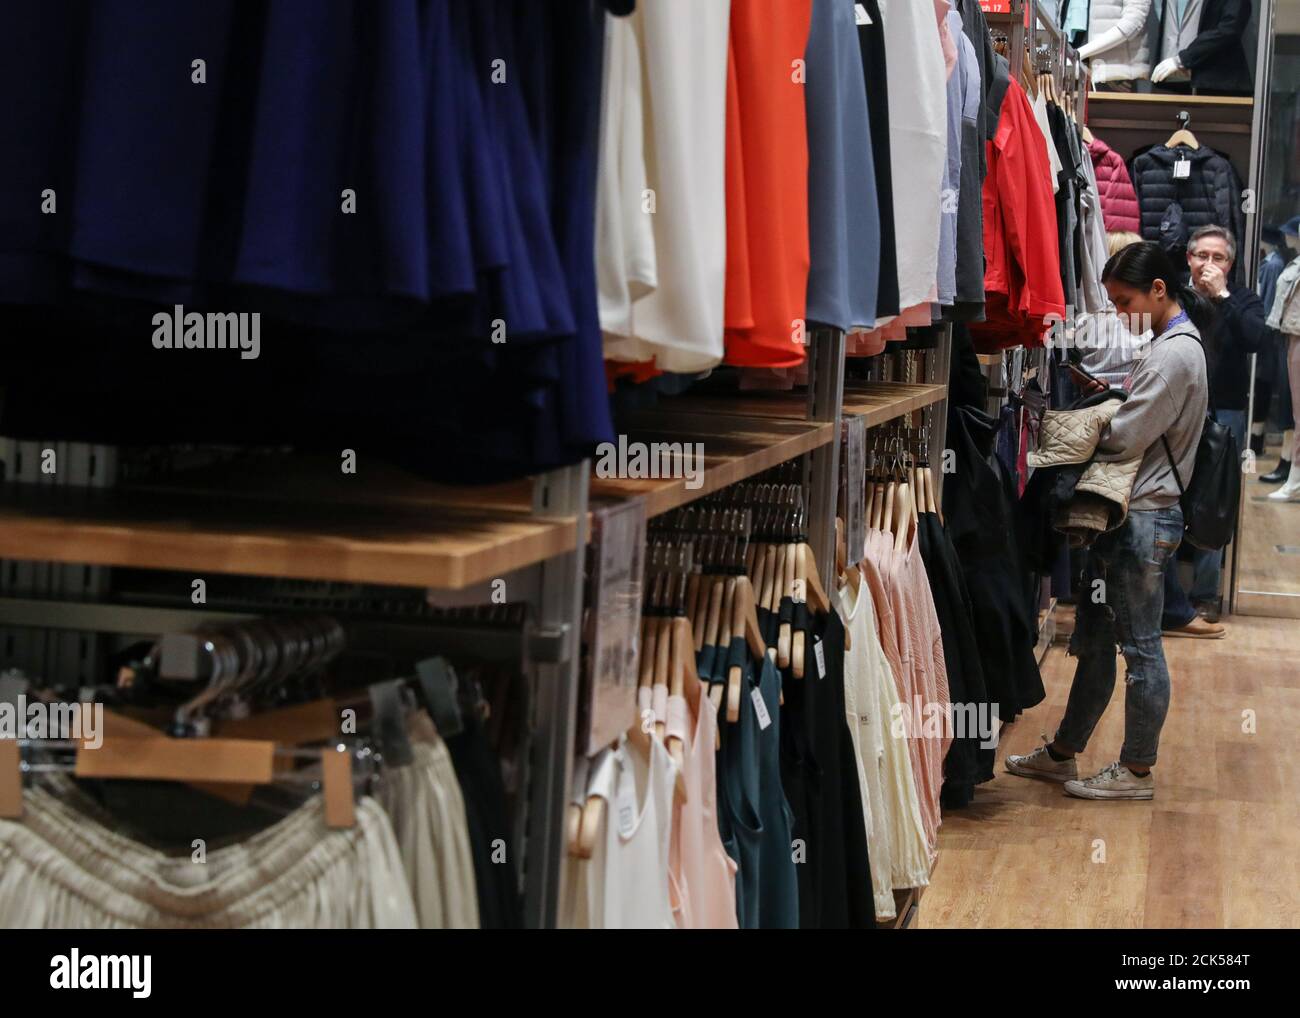 People shop at an H&M store during the grand opening of the The Hudson Yards development, a residential, commercial, and retail space on Manhattan's West side in New York City, New York, U.S., March 15, 2019. REUTERS/Brendan McDermid Stock Photo